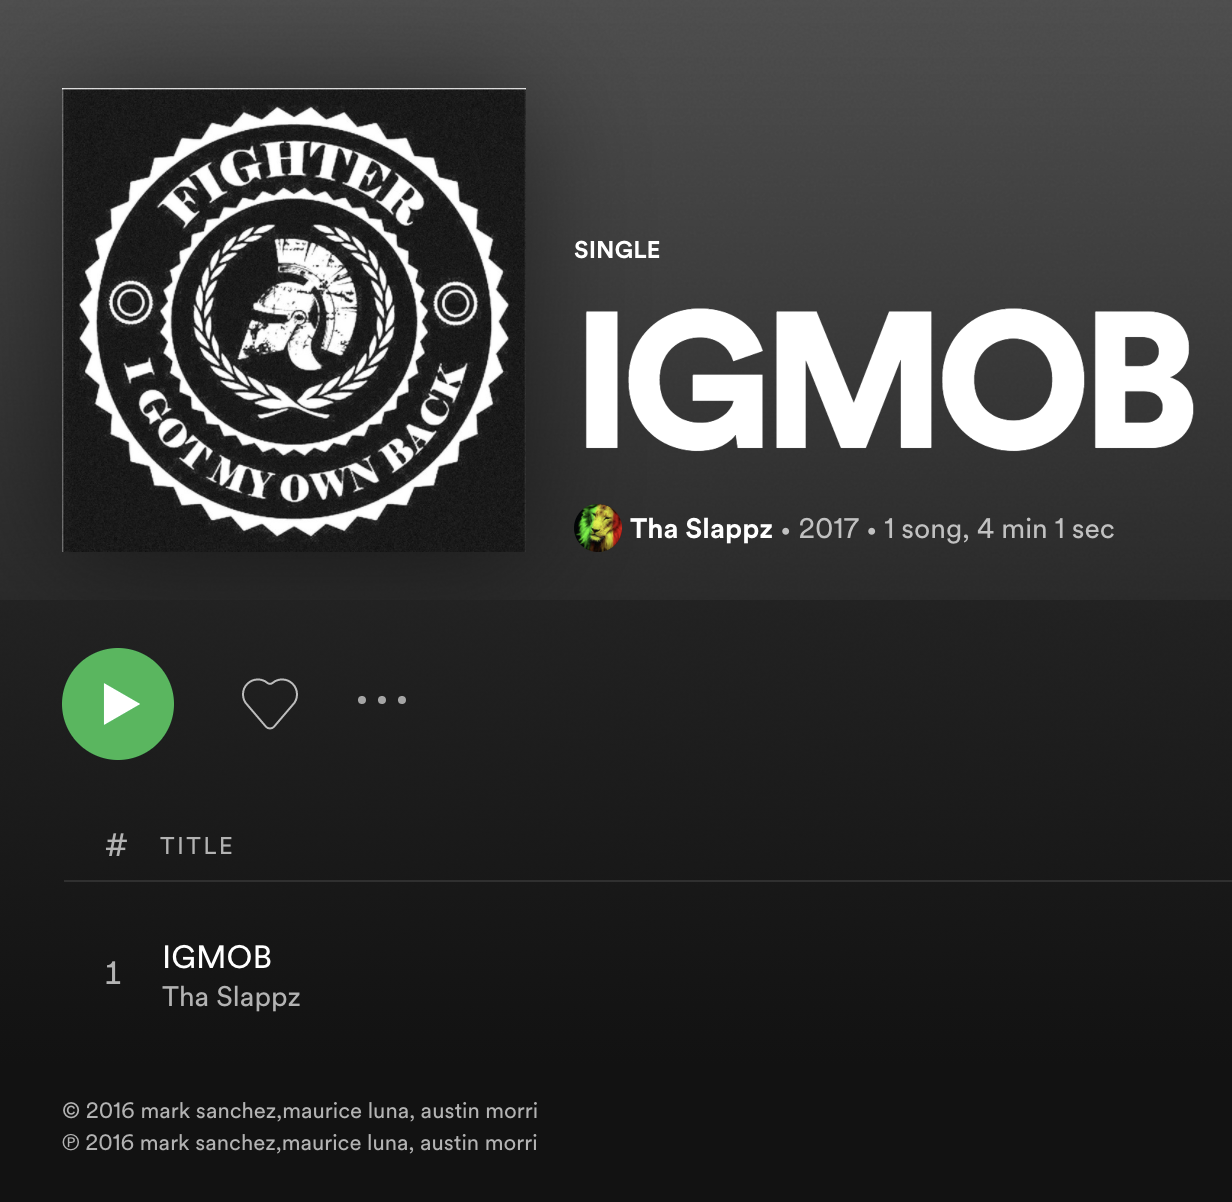 IGMOB official song created by THA SLAPPZ for the worlds number 1 boxing designer